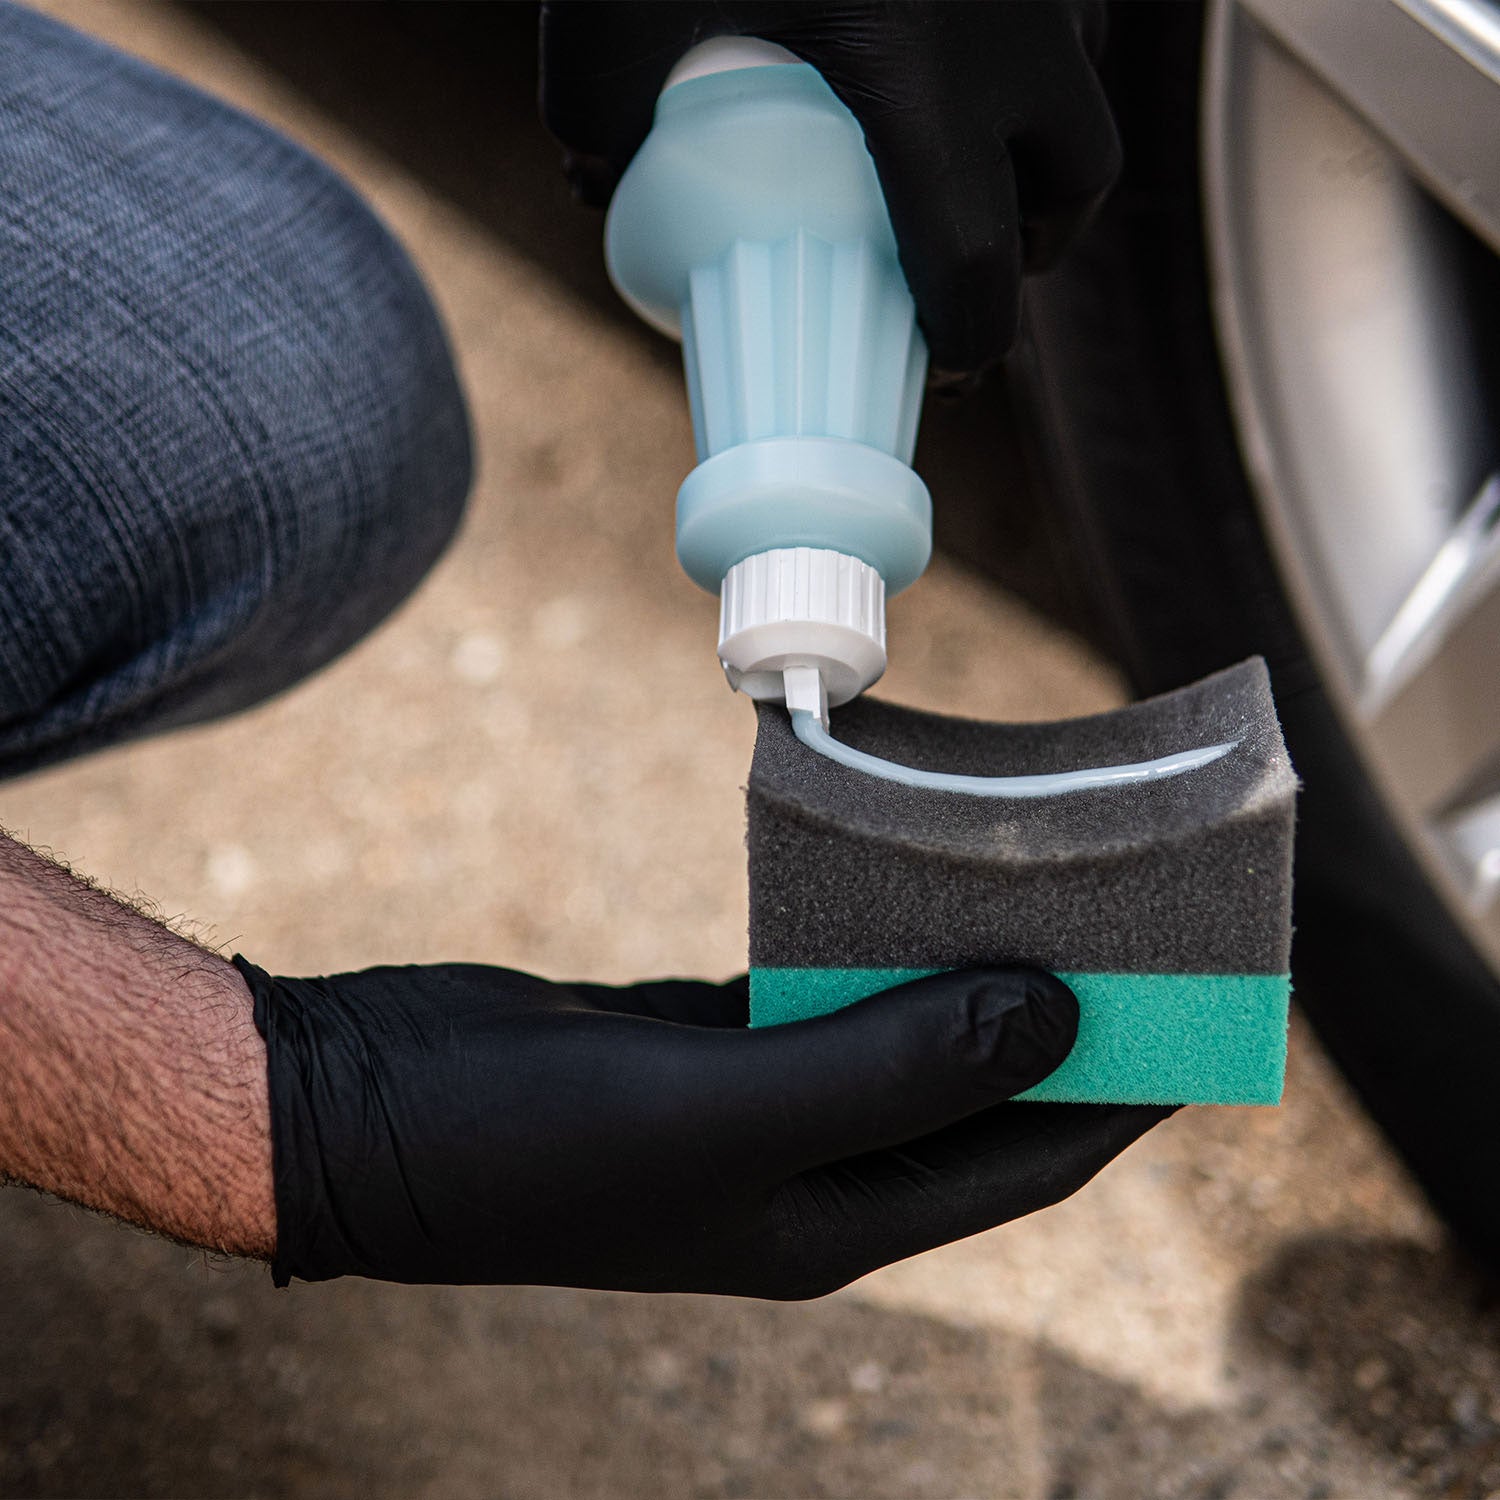 green-and-black-tire-dressing-applicator-getting-dressing-applied